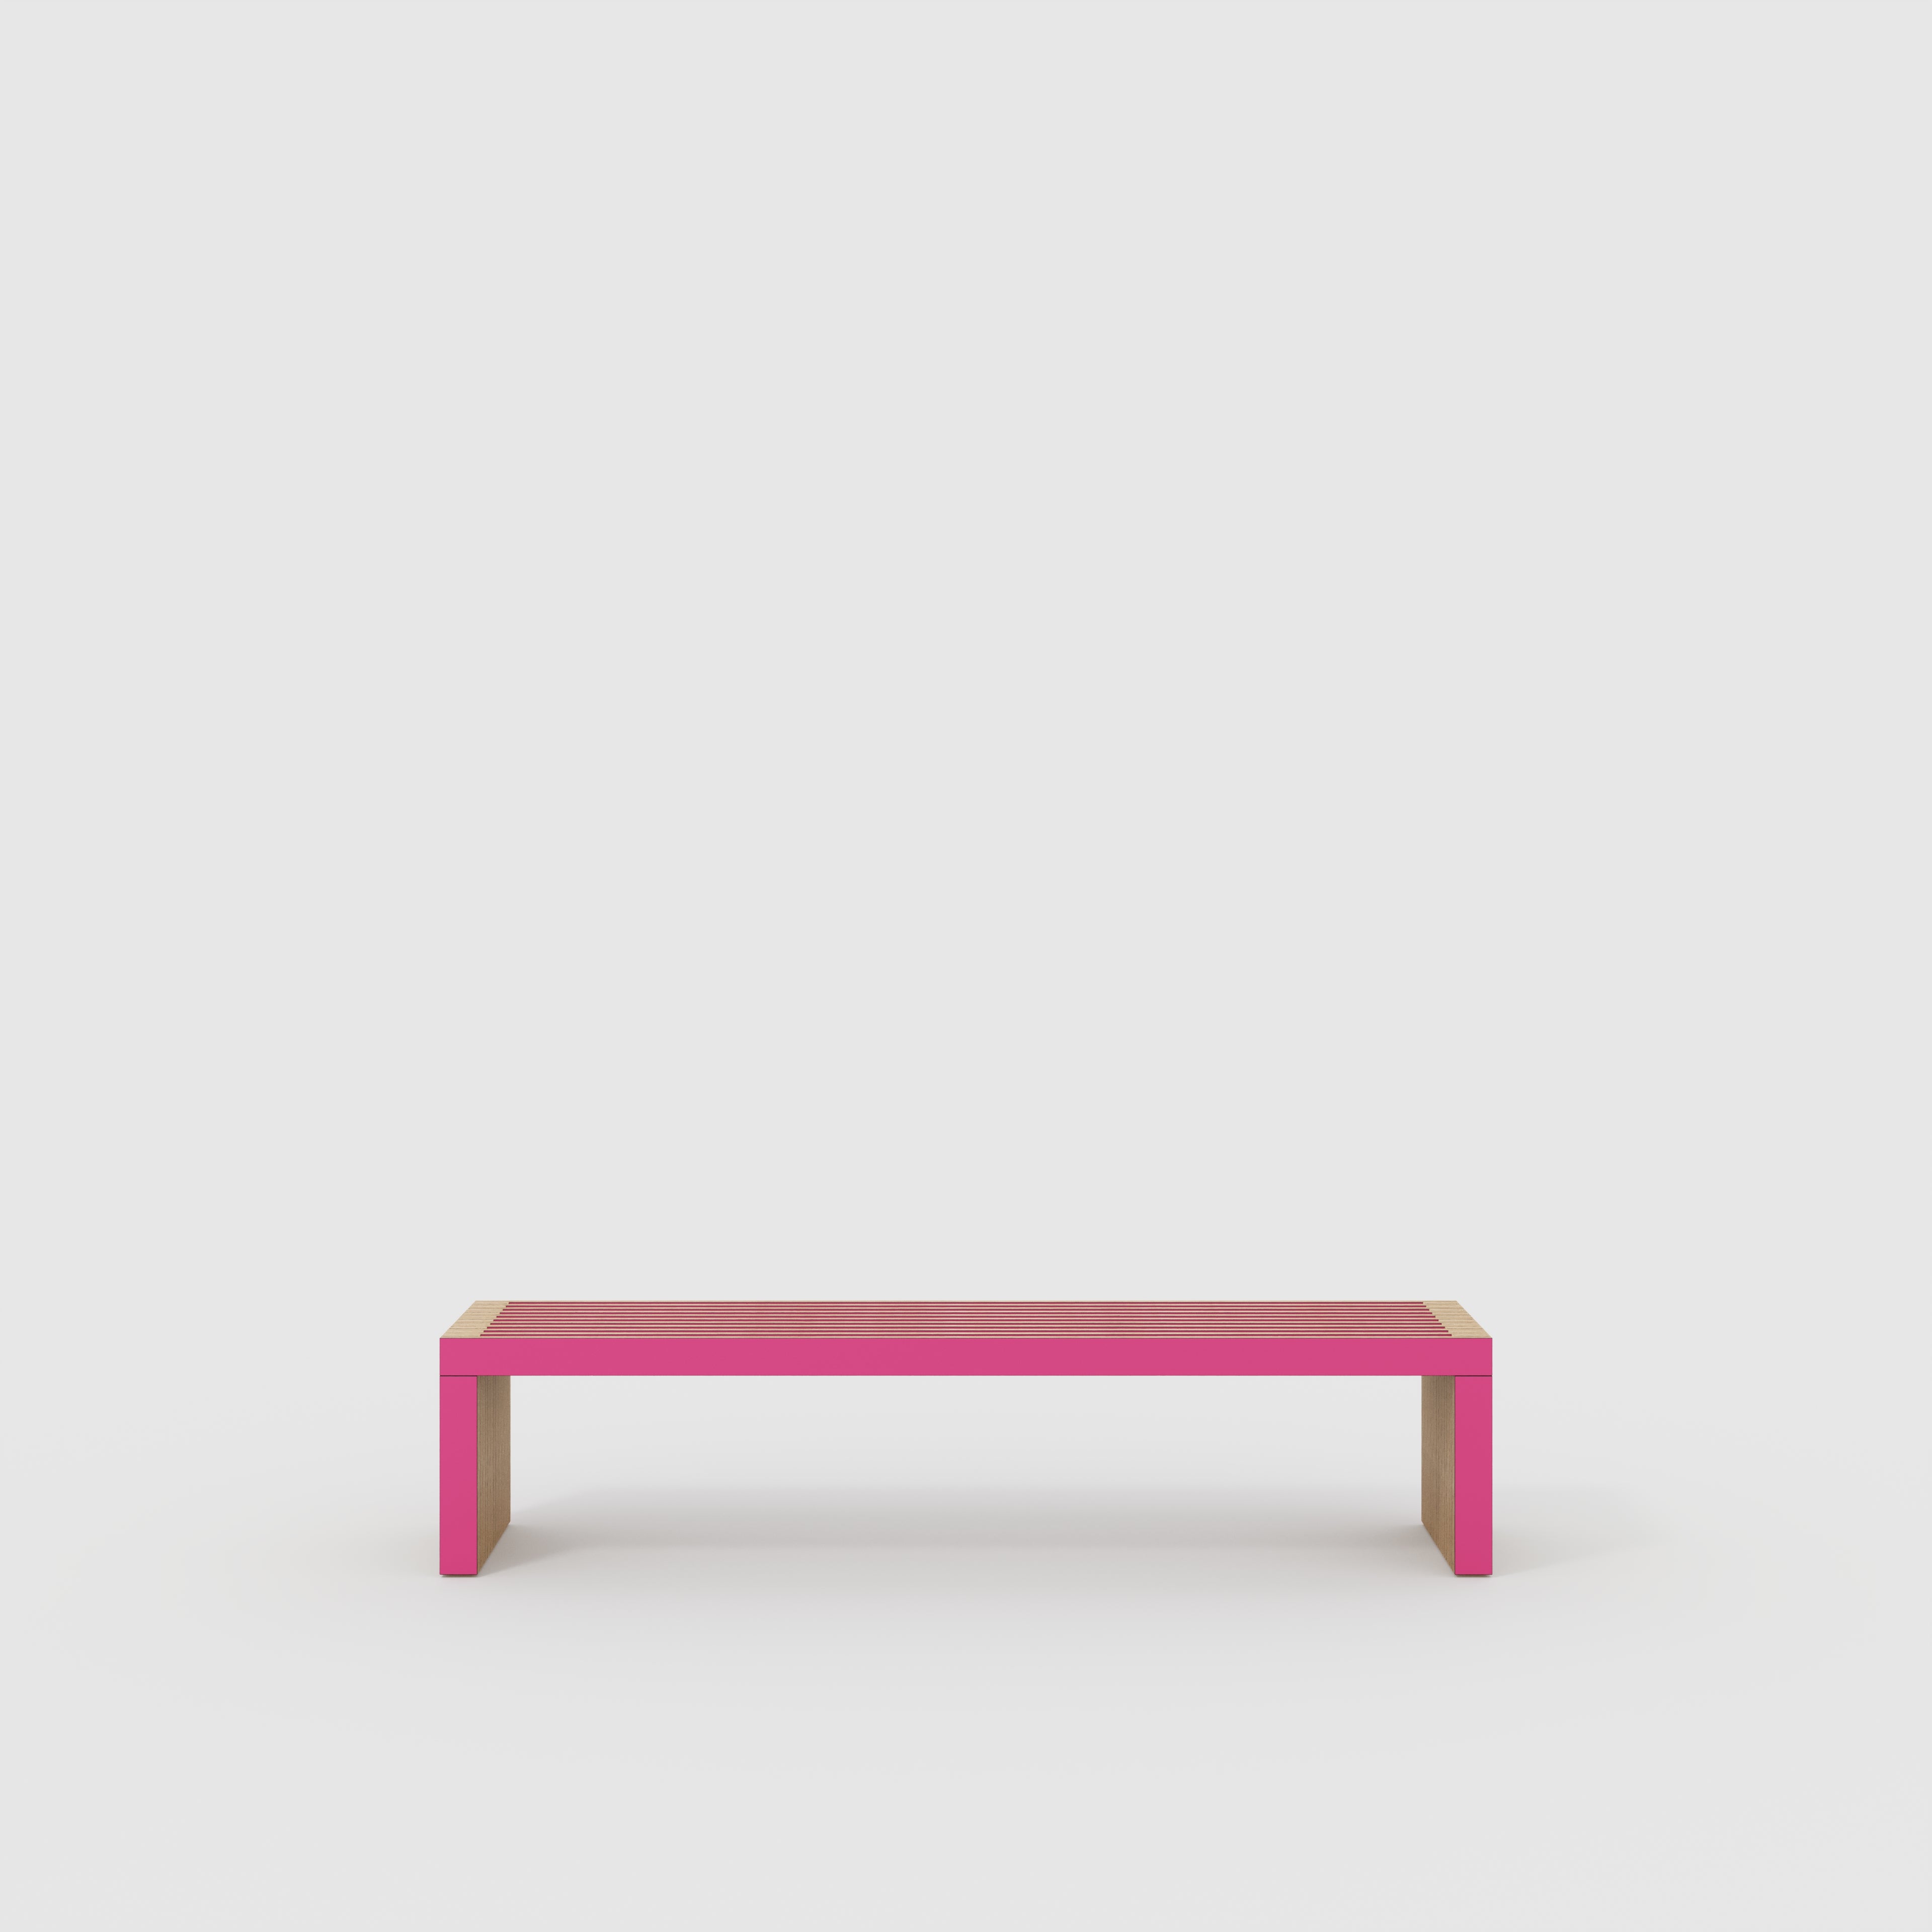 Bench Seat with Slats - Formica Juicy Pink - 2000(w) x 410(d) x 450(h)